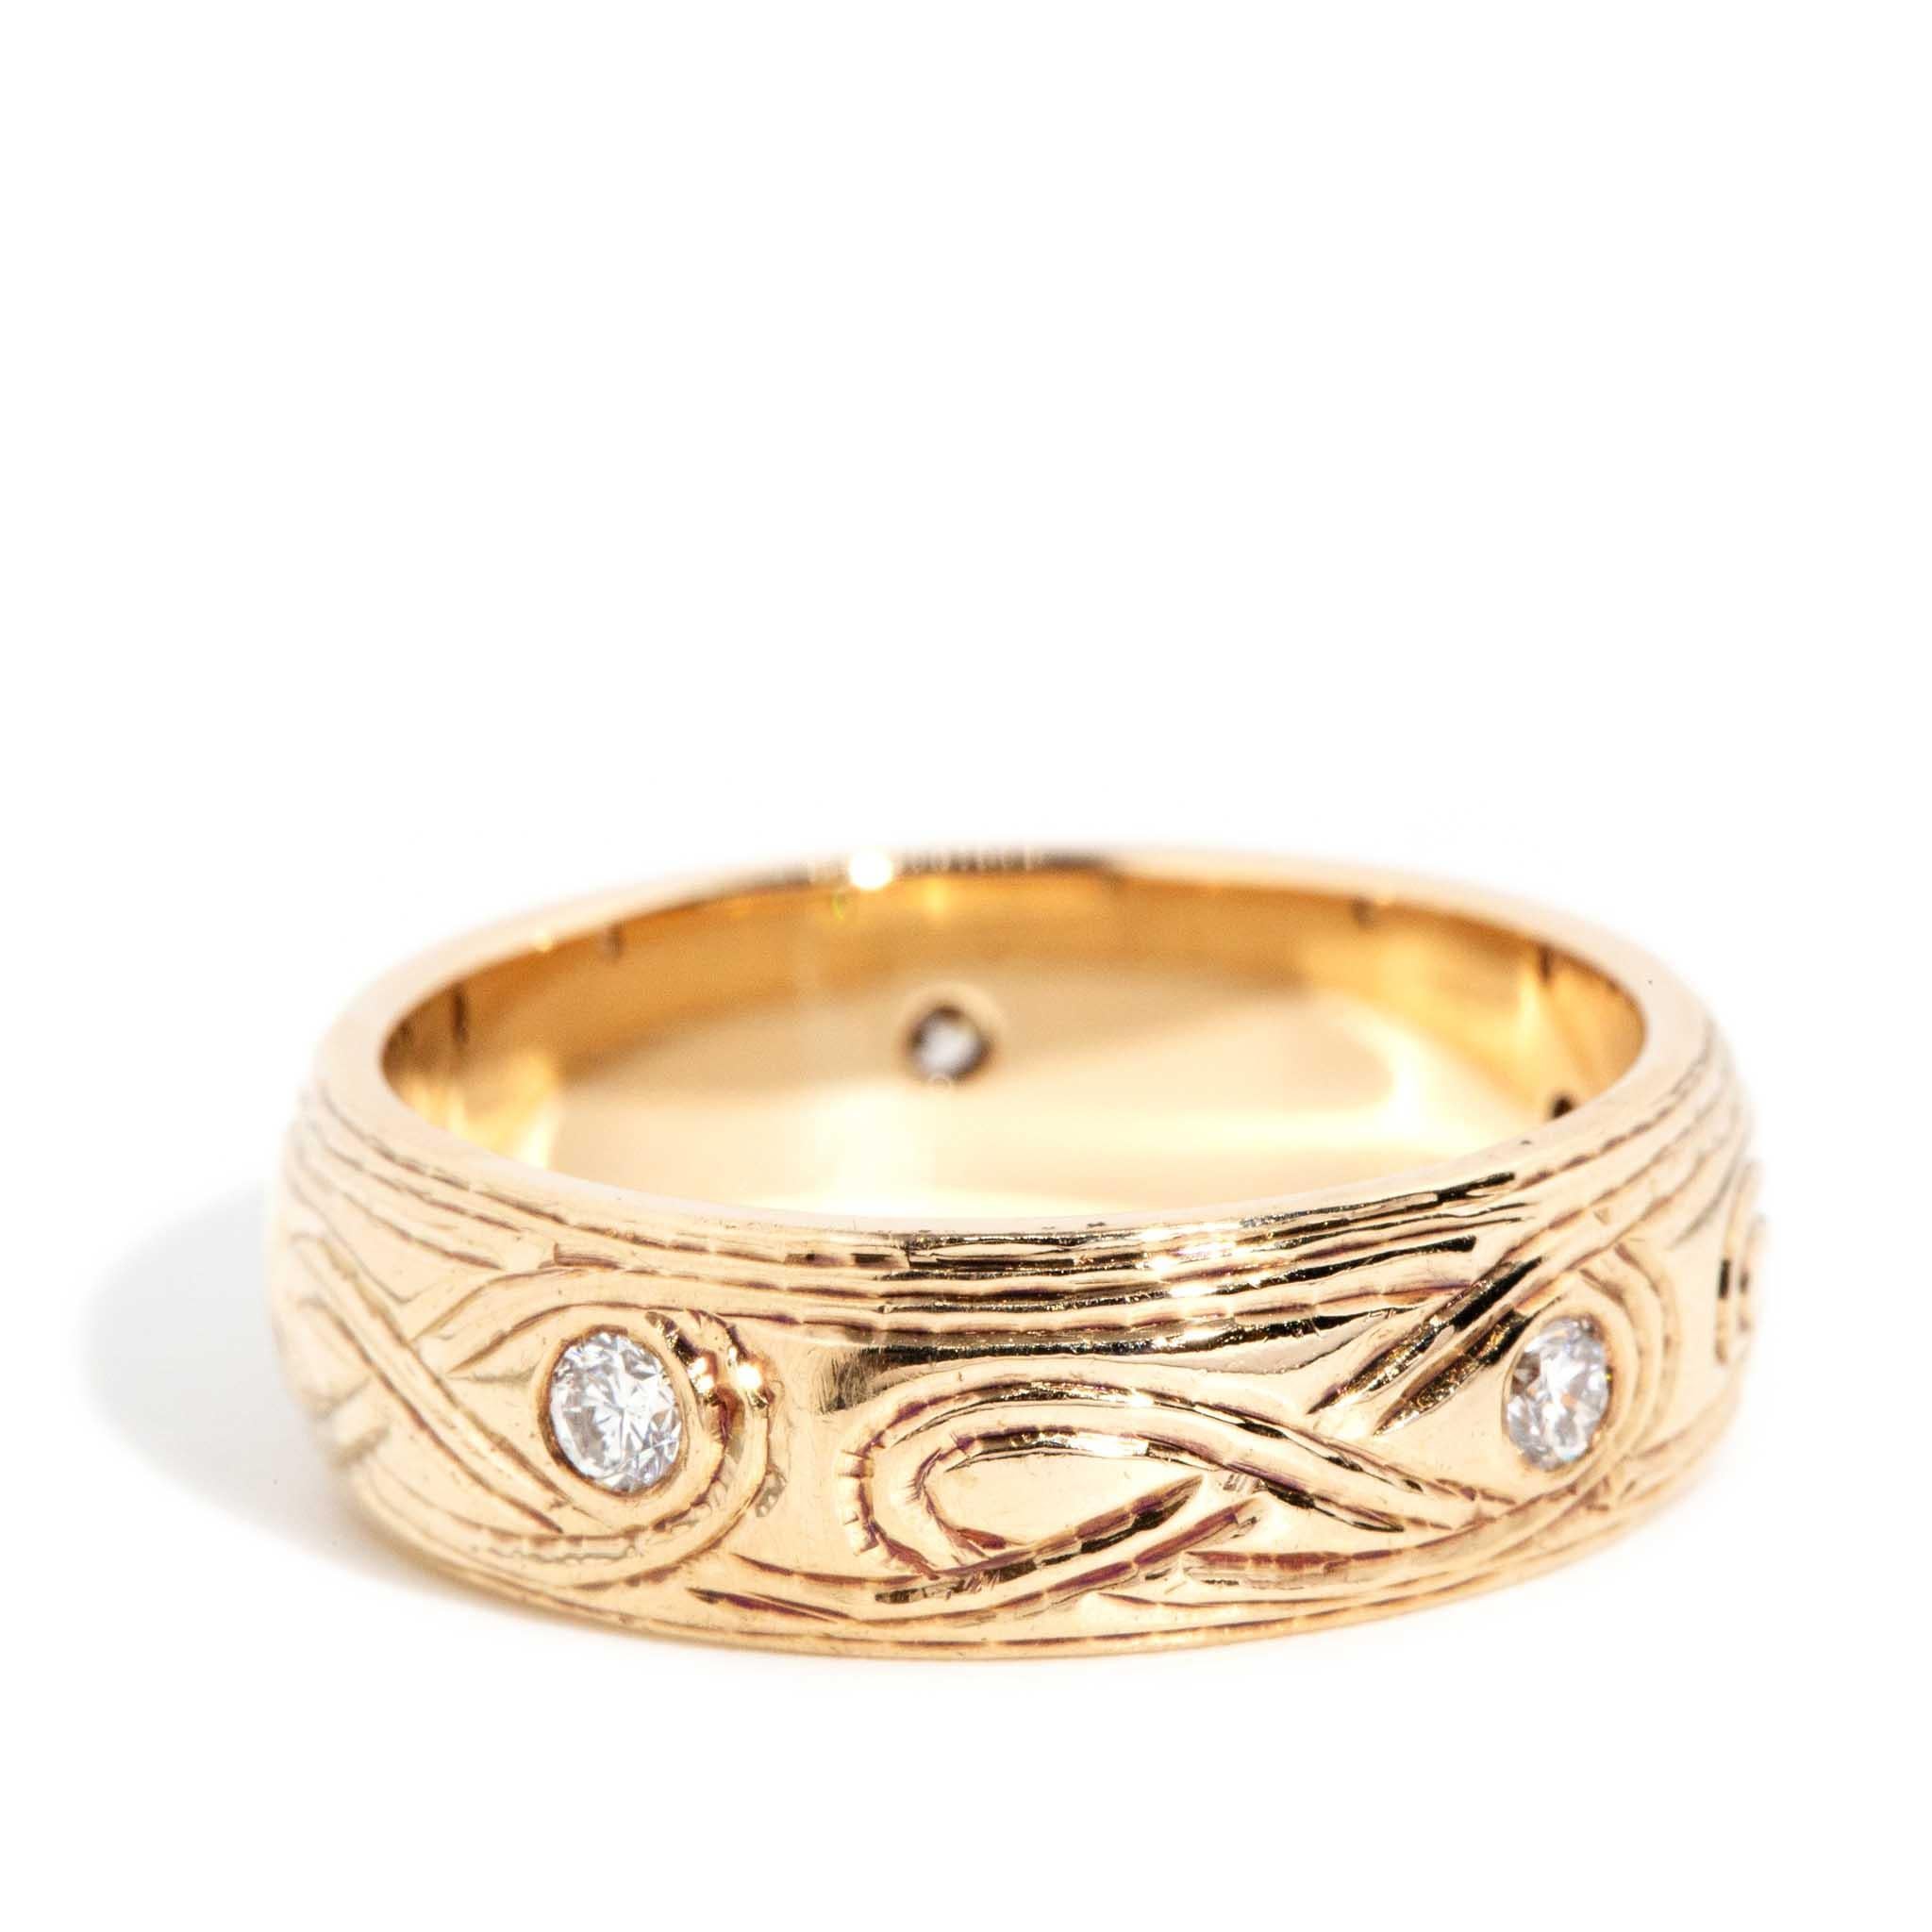 Modern Vintage Circa 1990s Patterned Diamond Wedding Band 9 Carat Yellow Gold For Sale